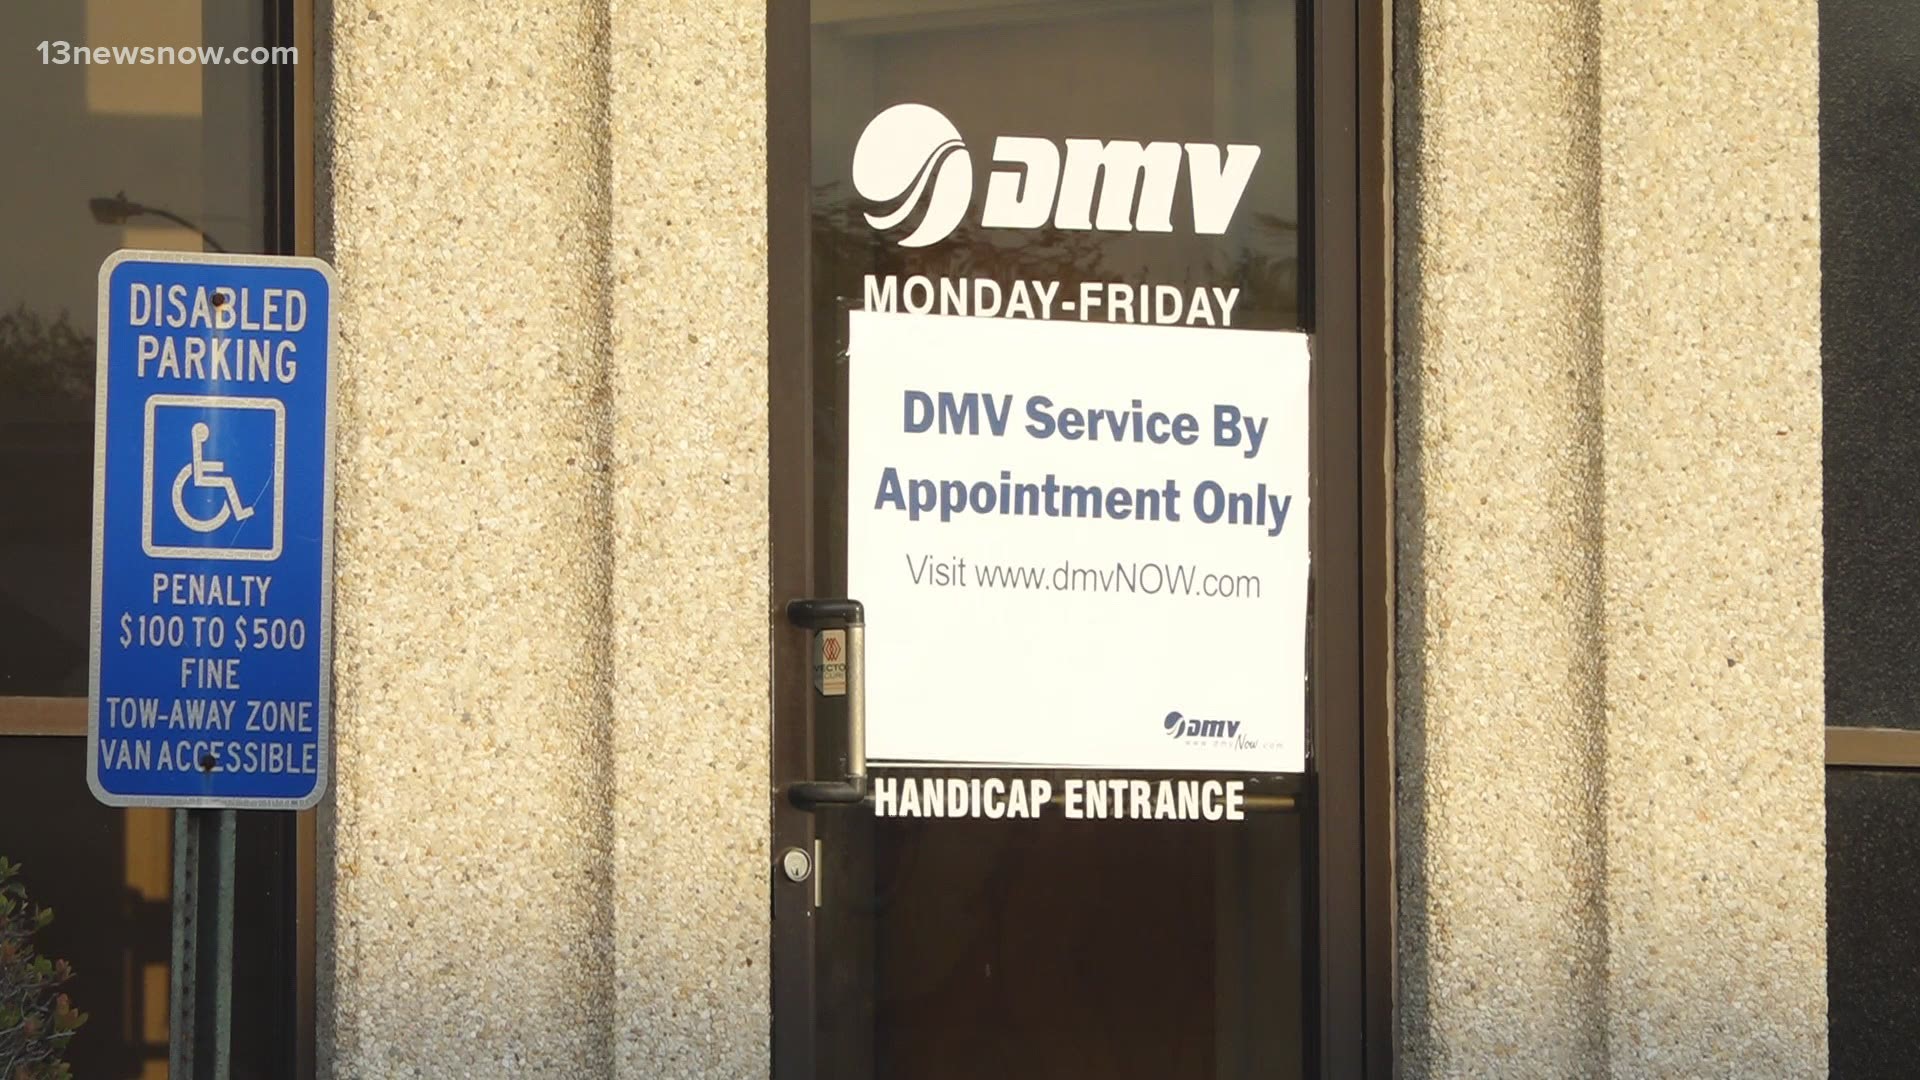 A year into the pandemic and things are opening up in Virginia. But the DMV isn't.